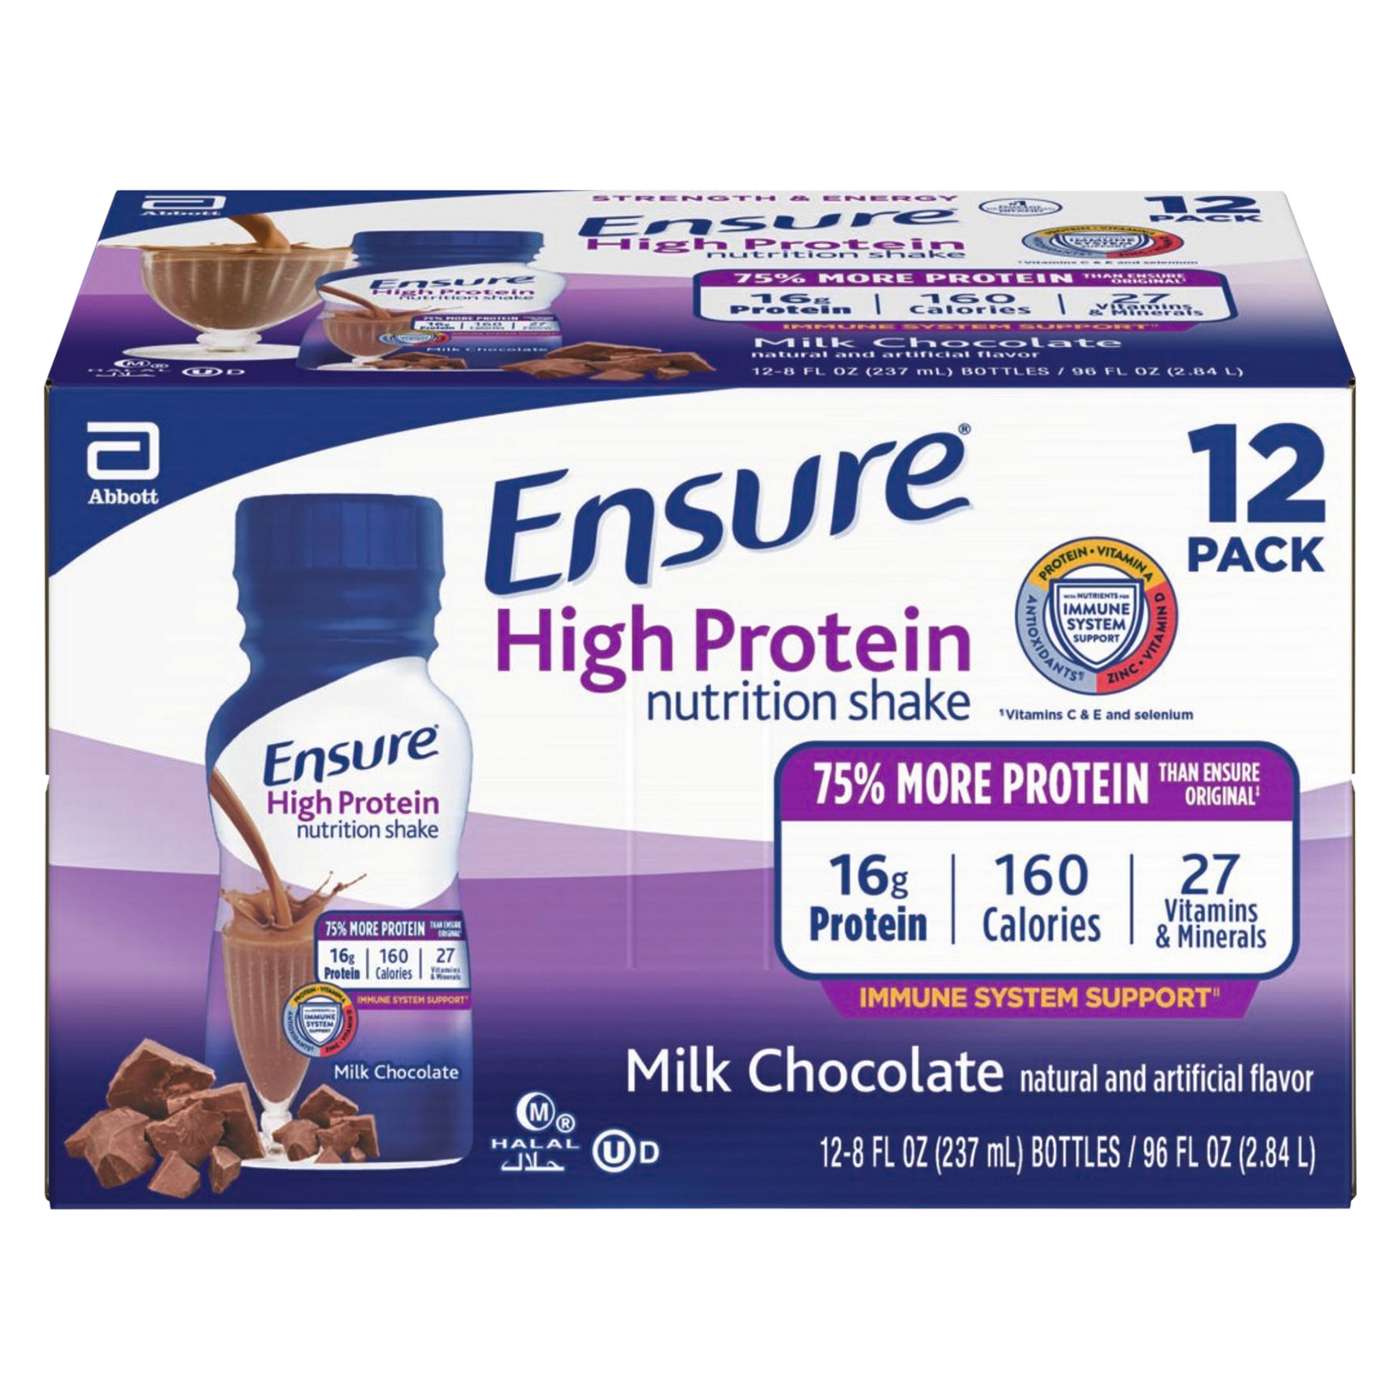 Ensure Ensure High Protein Nutritional Shake, 16g Protein, Meal Replacement Shake, Milk Chocolate, 8 fl oz, 12 Ct; image 2 of 2